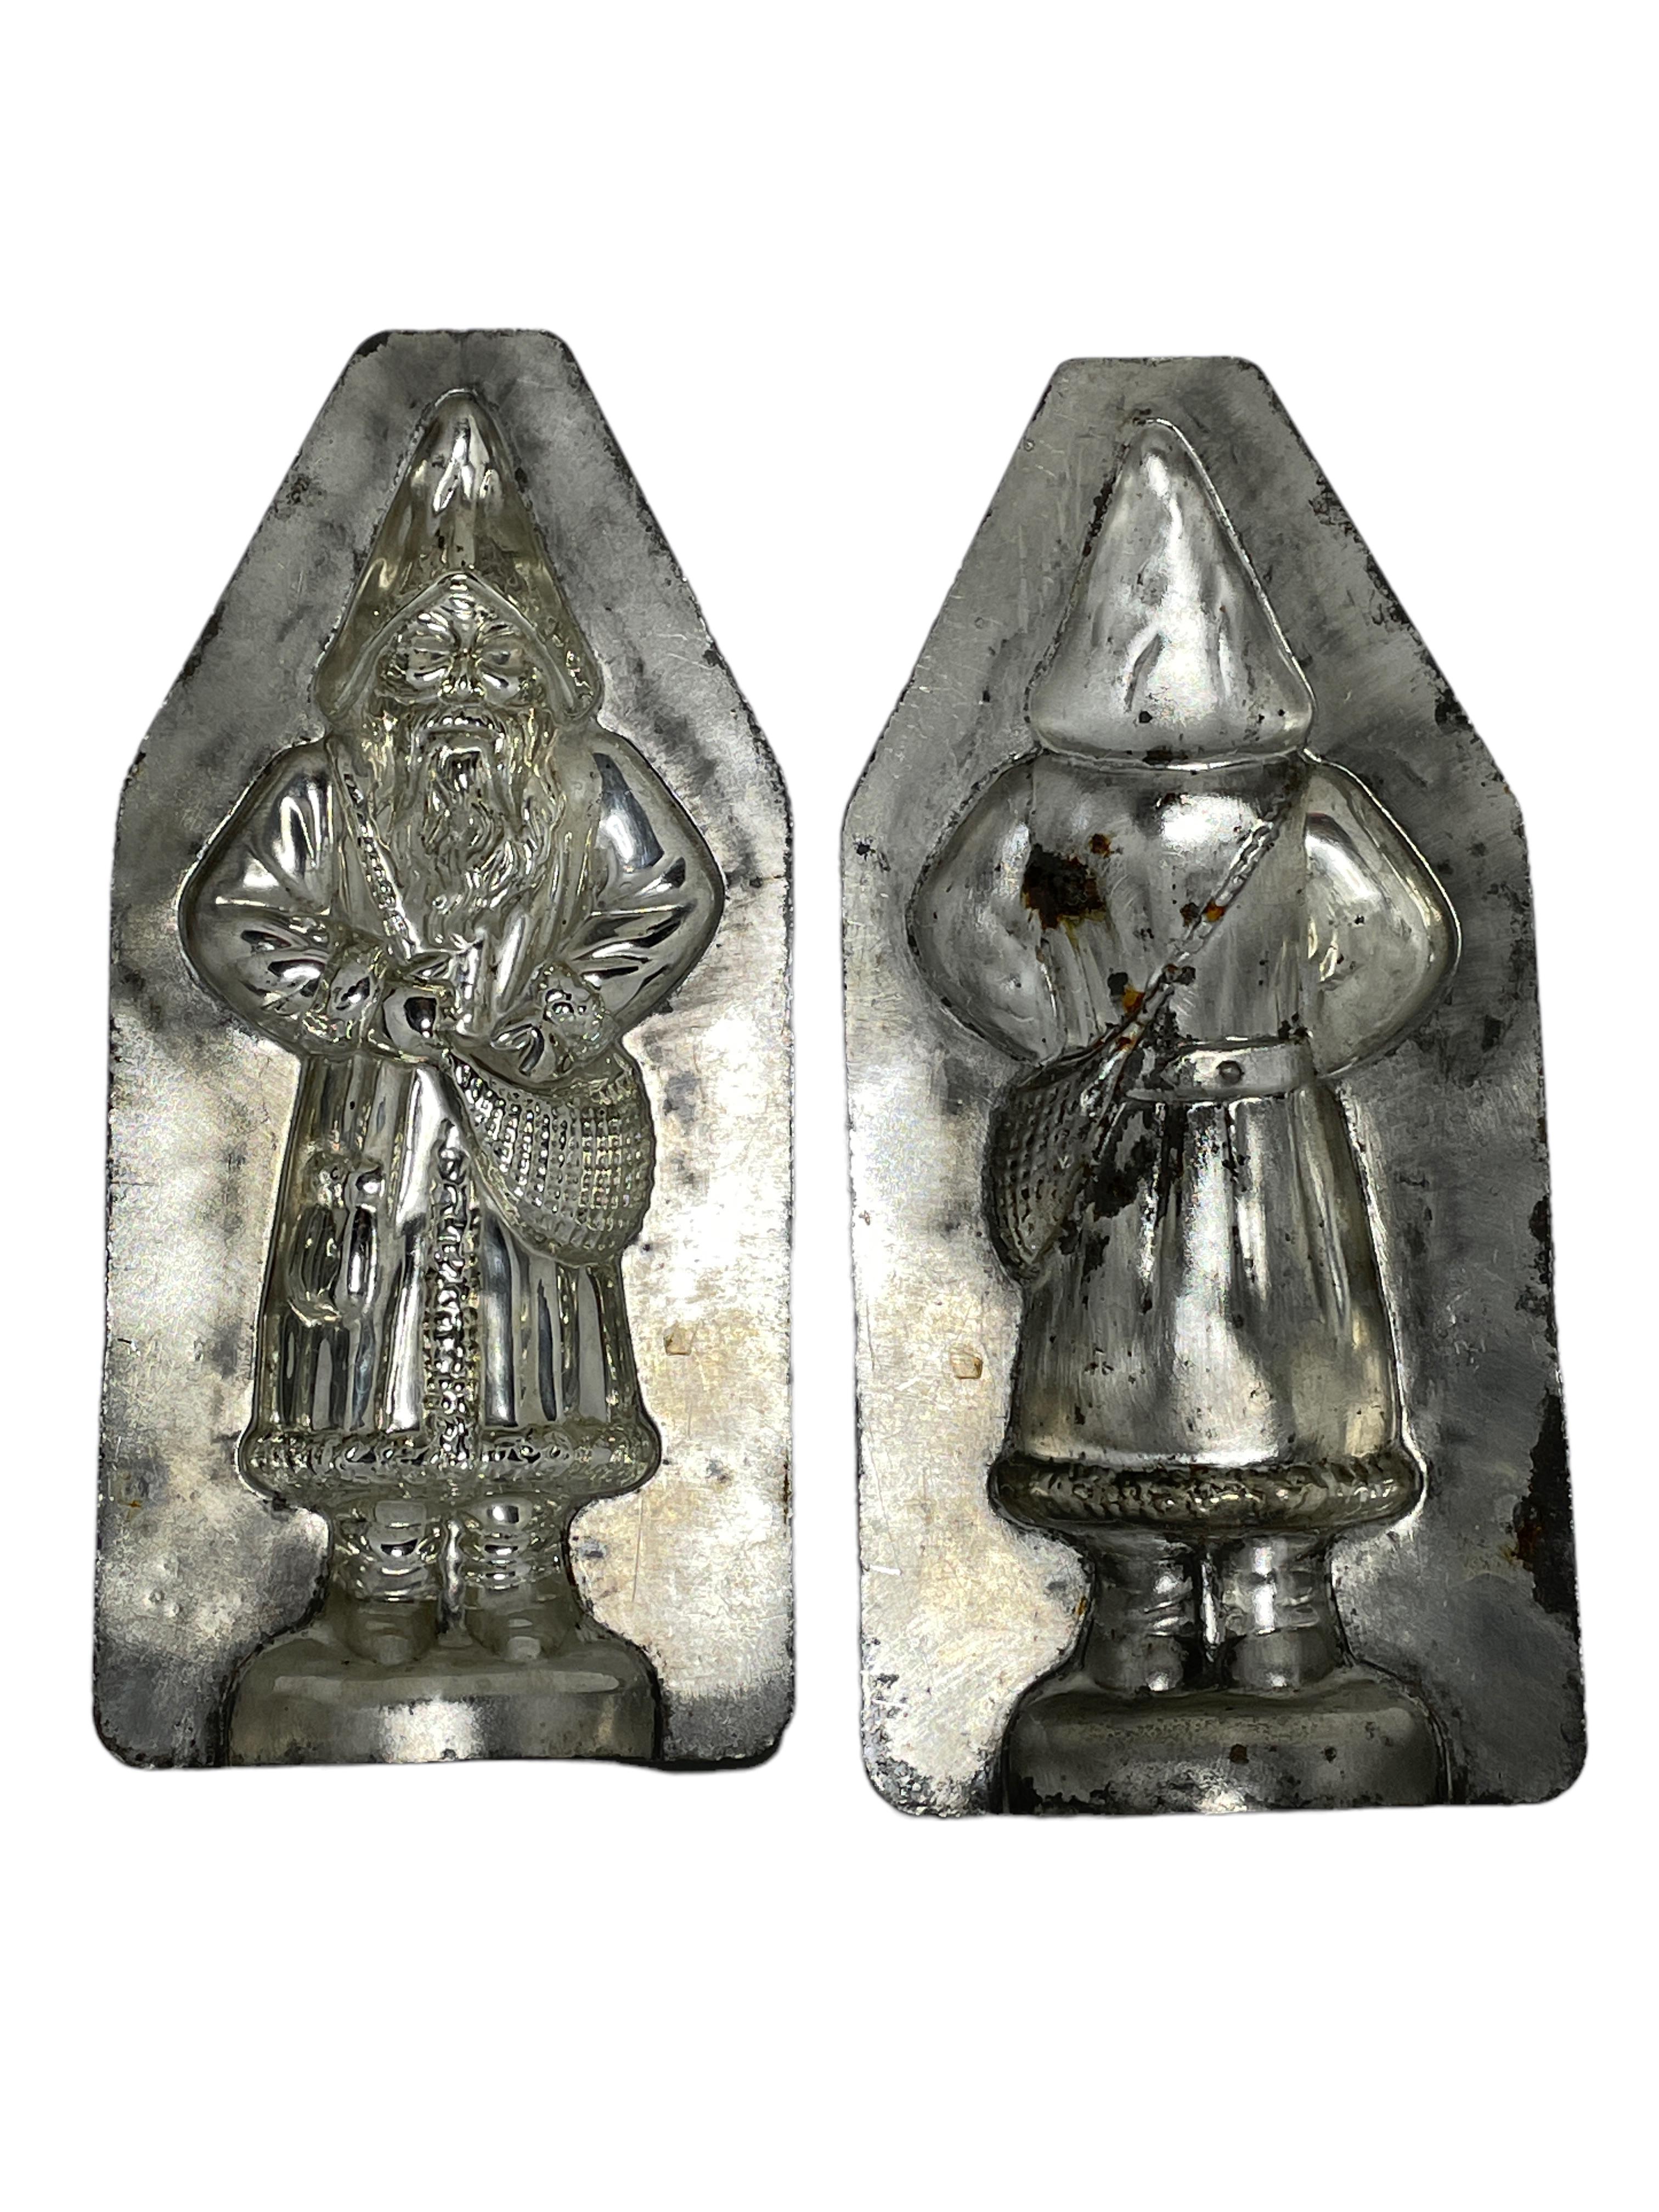 French Santa Claus Belsnickle Chocolate Mold Antique 1910s, Matfer, France